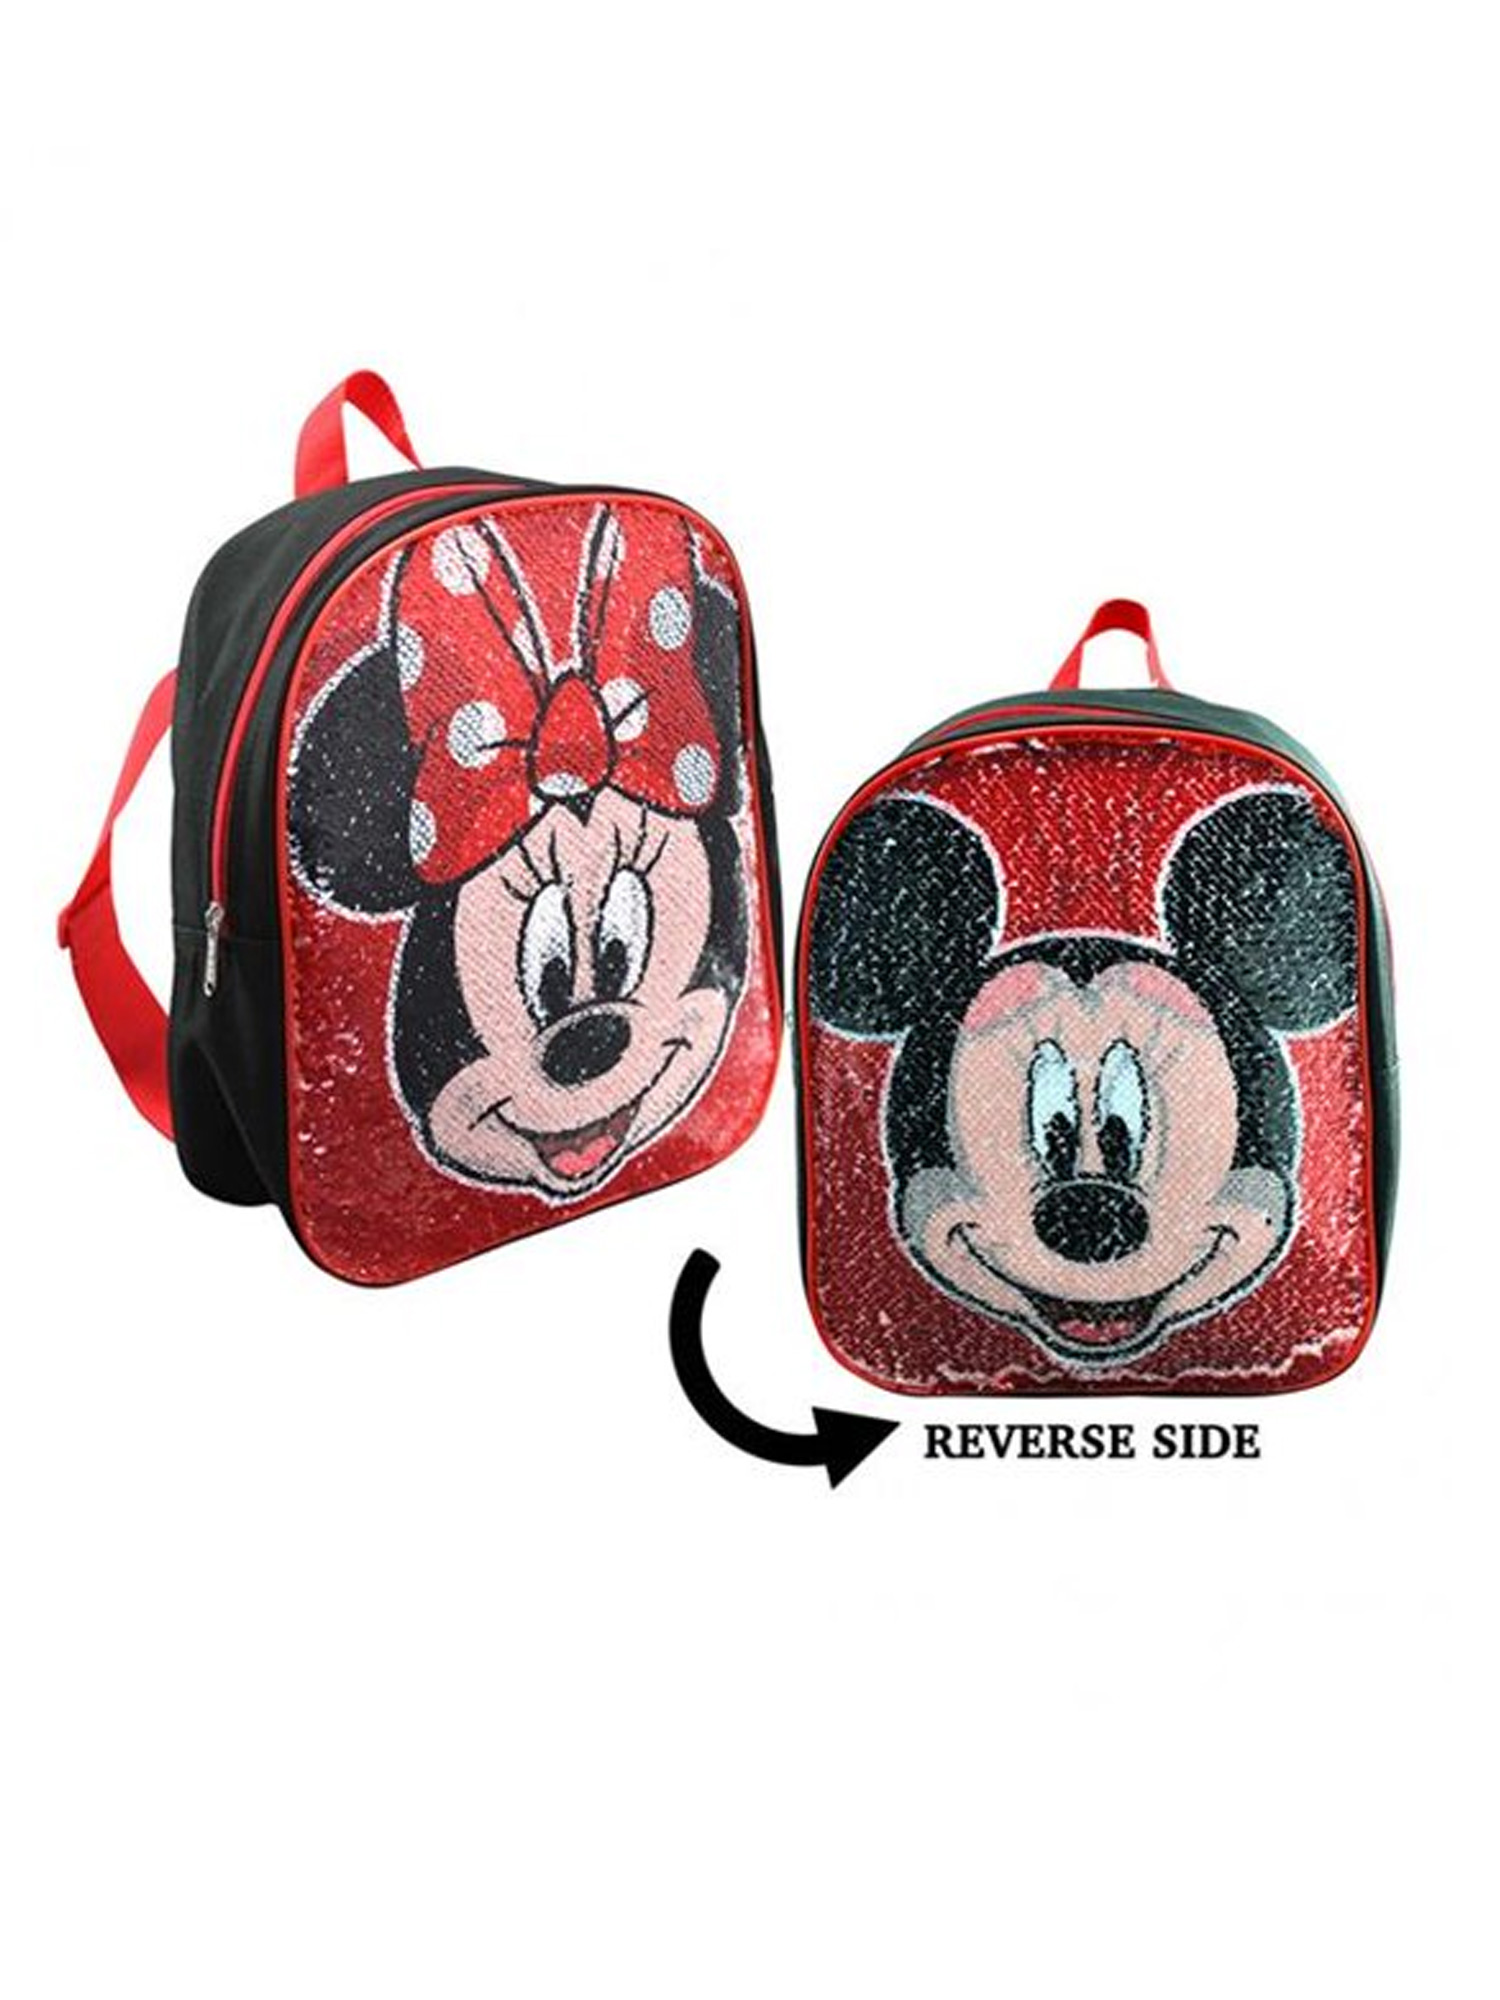 Disney Mickey & Minnie Mouse Backpack 12" Reversible Sequins Black Red - image 3 of 4